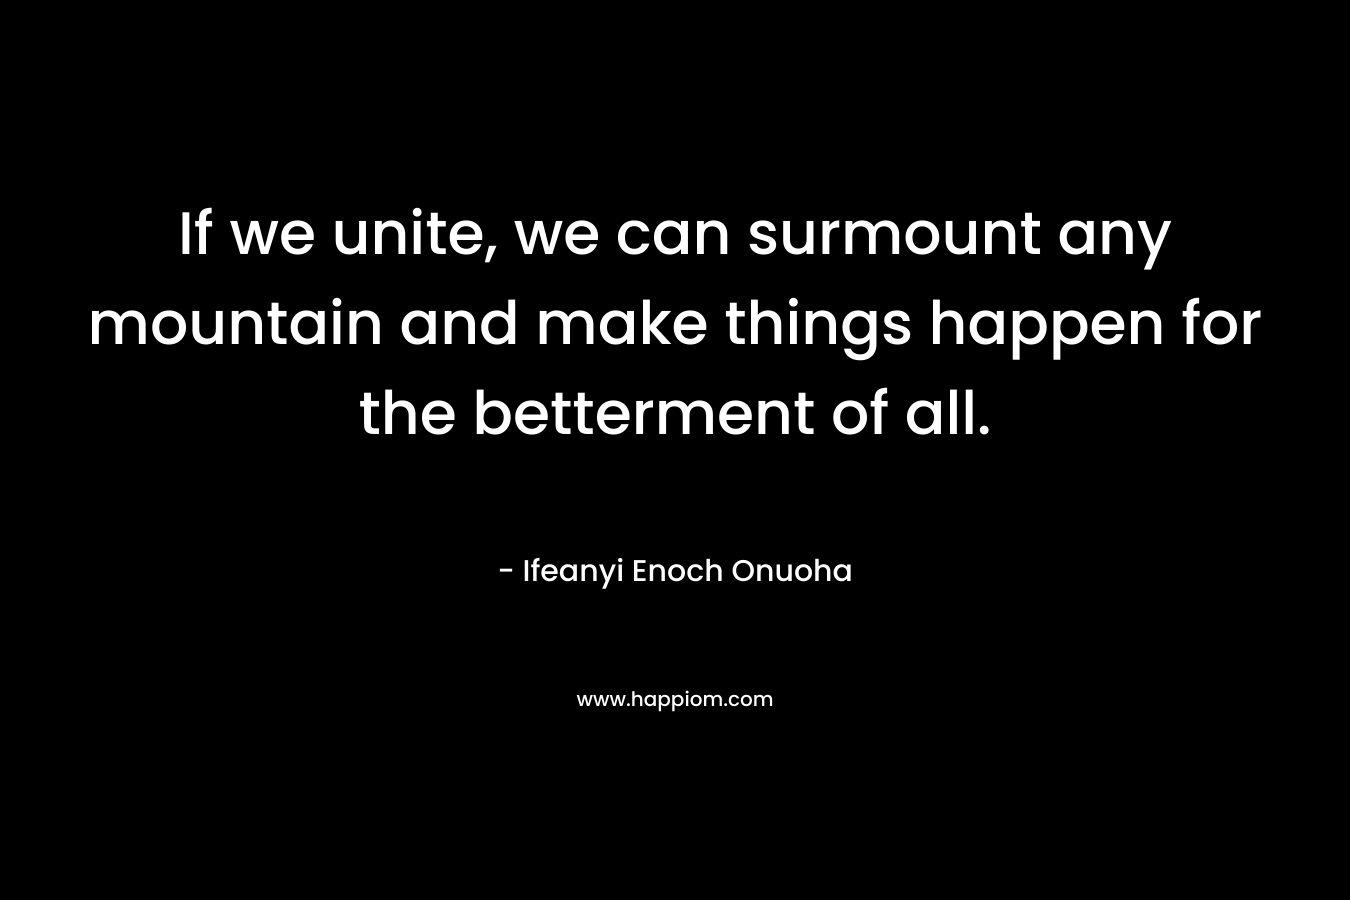 If we unite, we can surmount any mountain and make things happen for the betterment of all. – Ifeanyi Enoch Onuoha